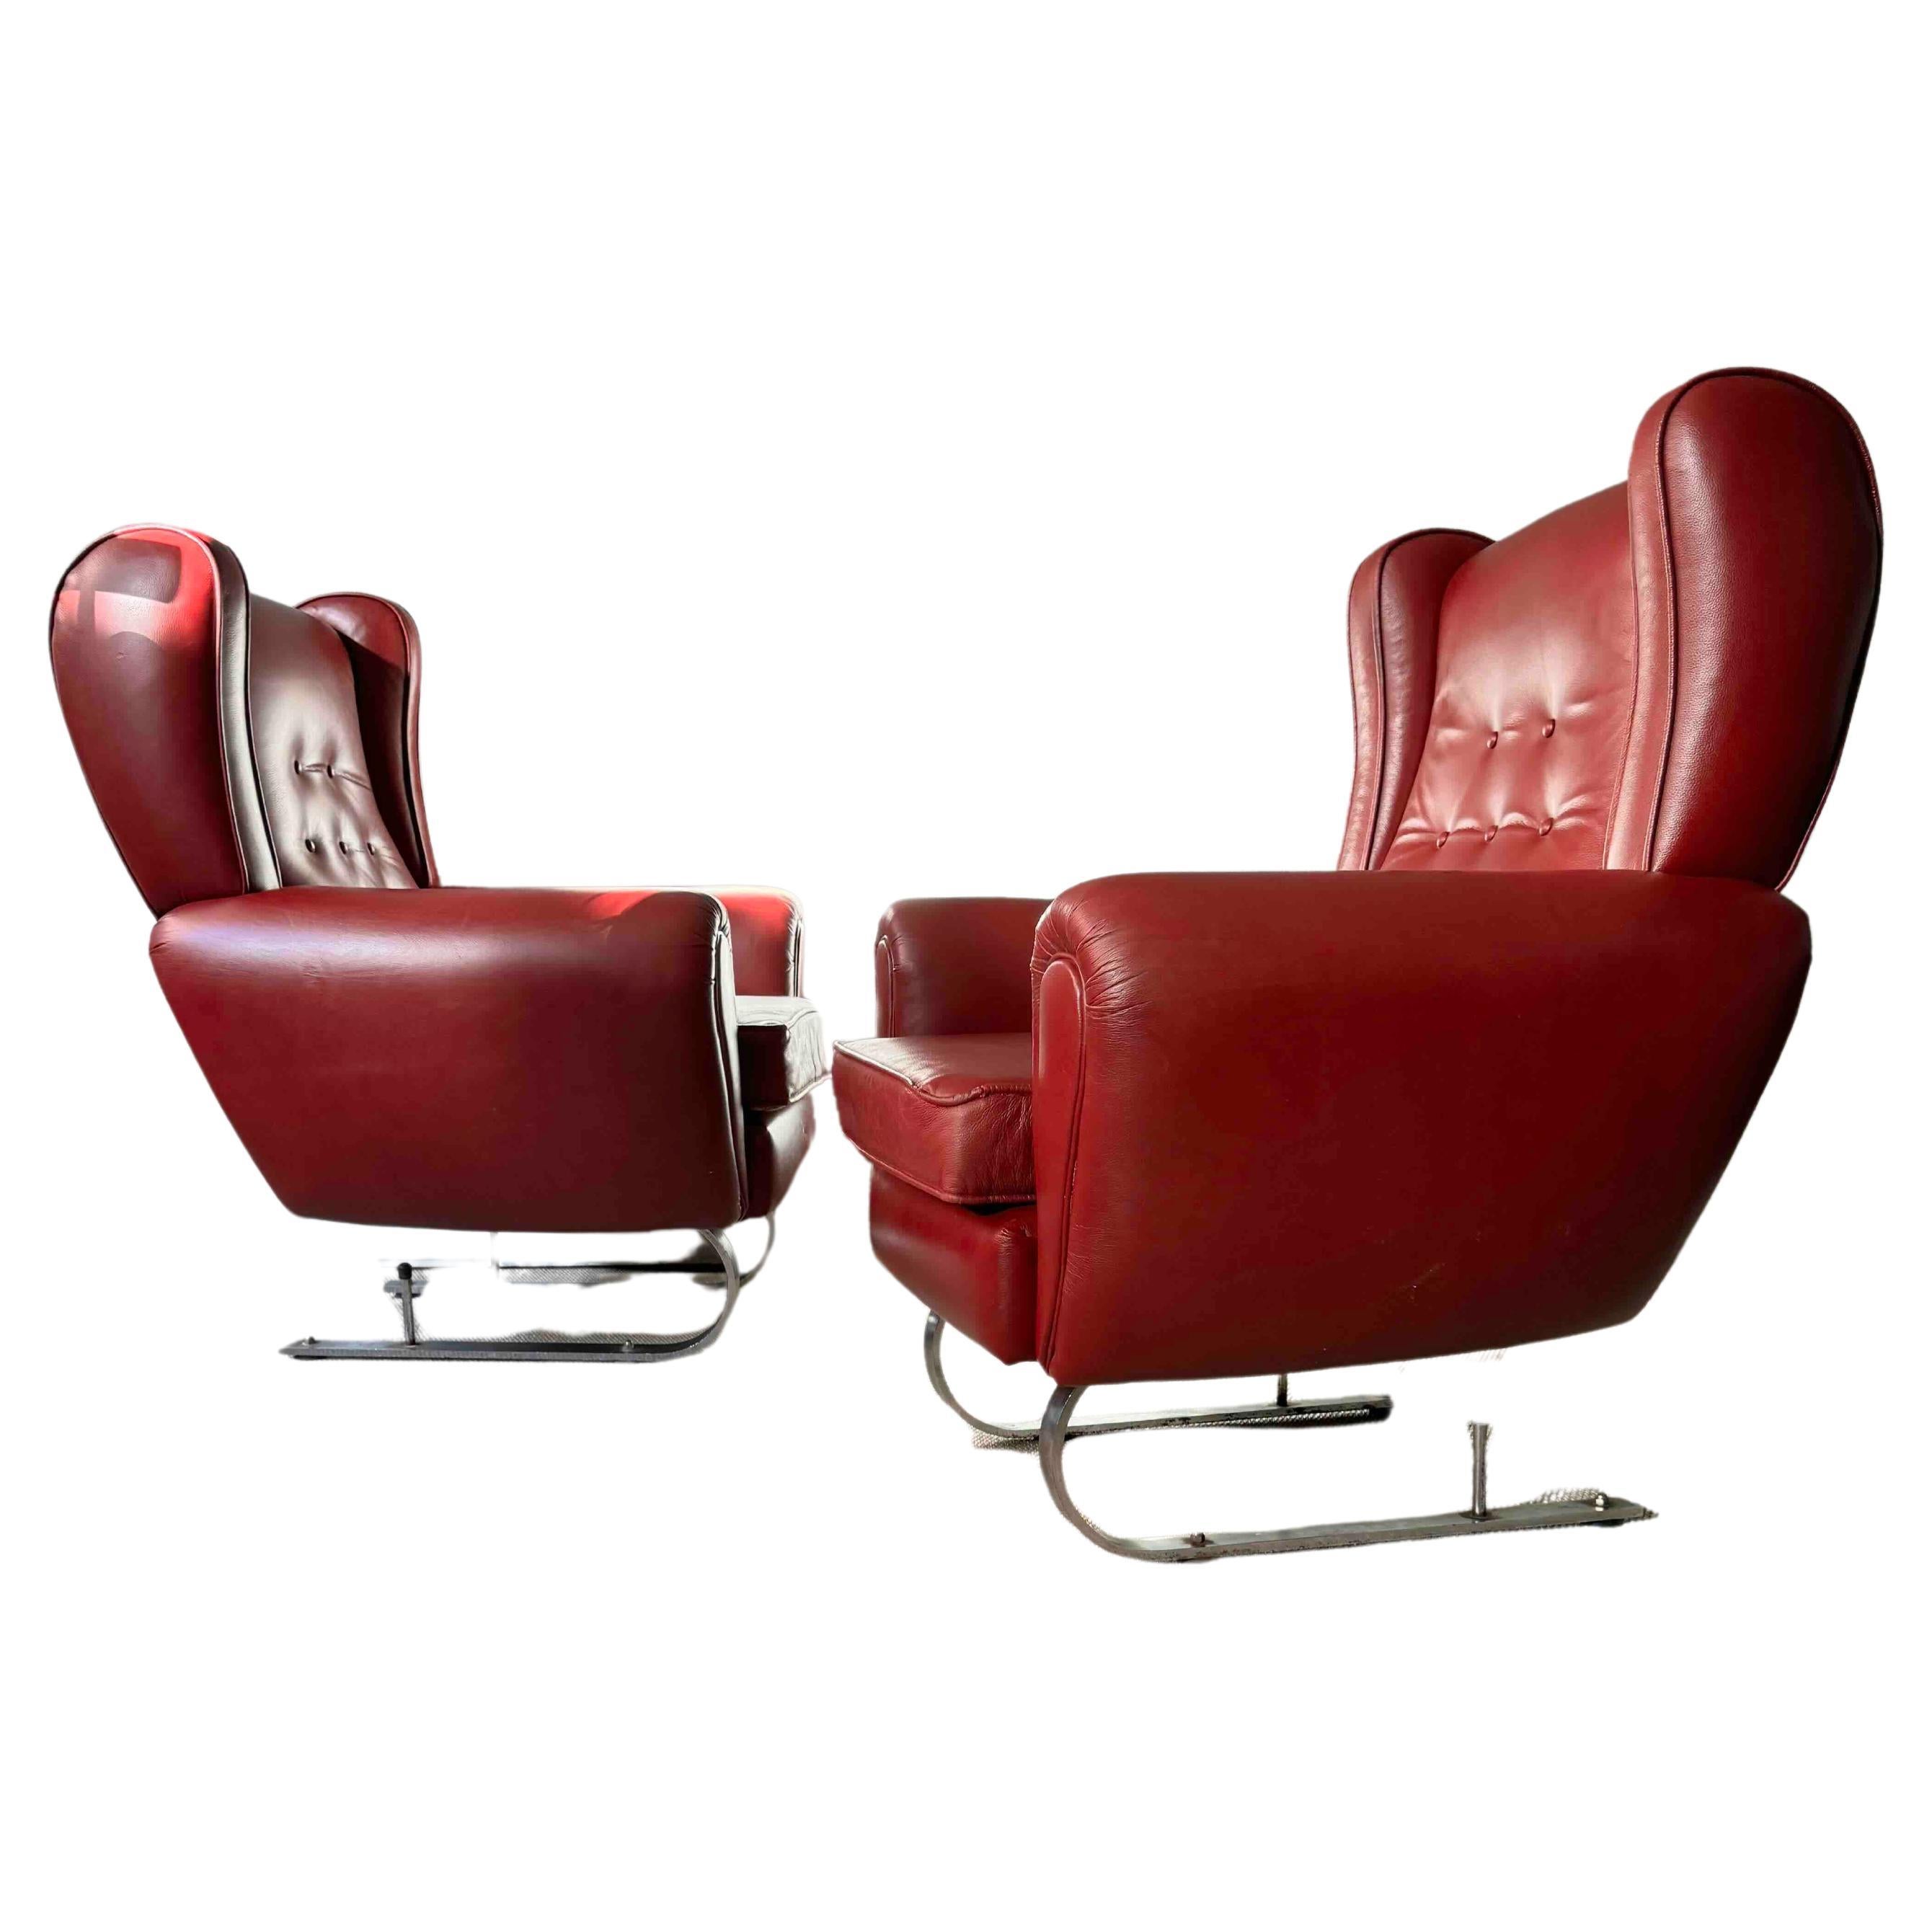 Pair of Mid Century Modern Armchairs attributed to H. W. Klein, Denmark 1960's For Sale